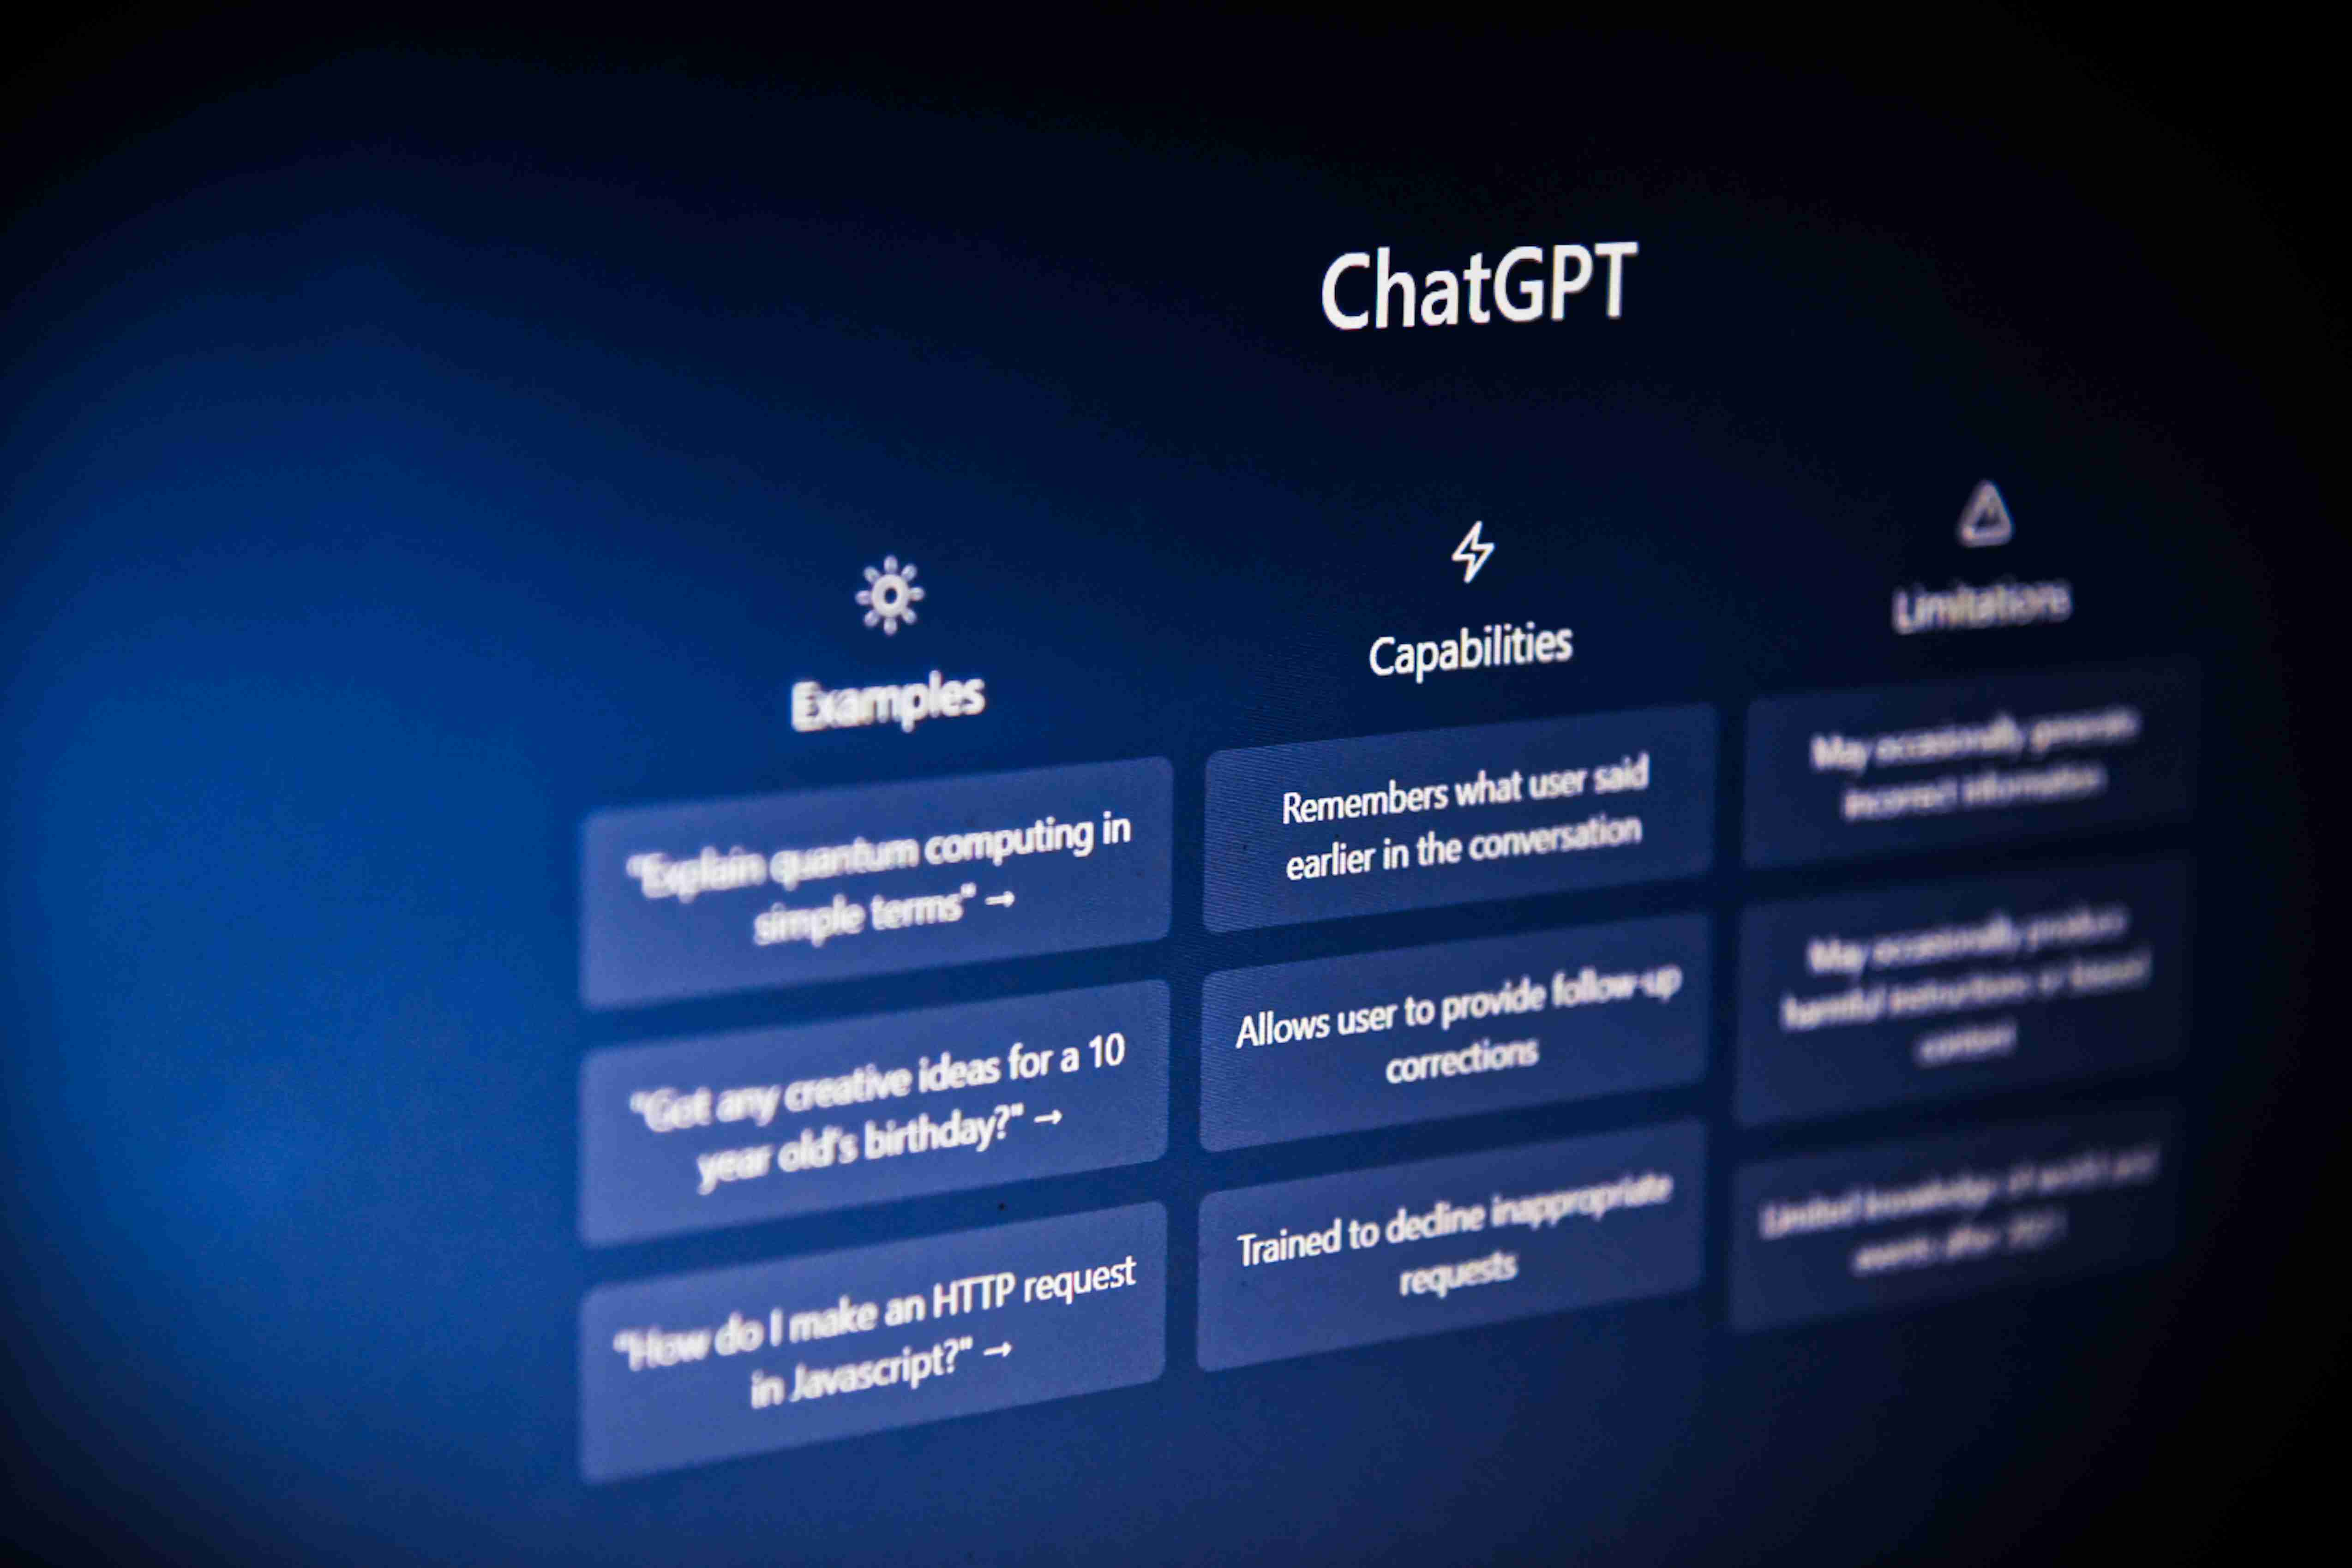 Troubleshooting ChatGPT: Tips to Eliminate Unexpected Error Messages